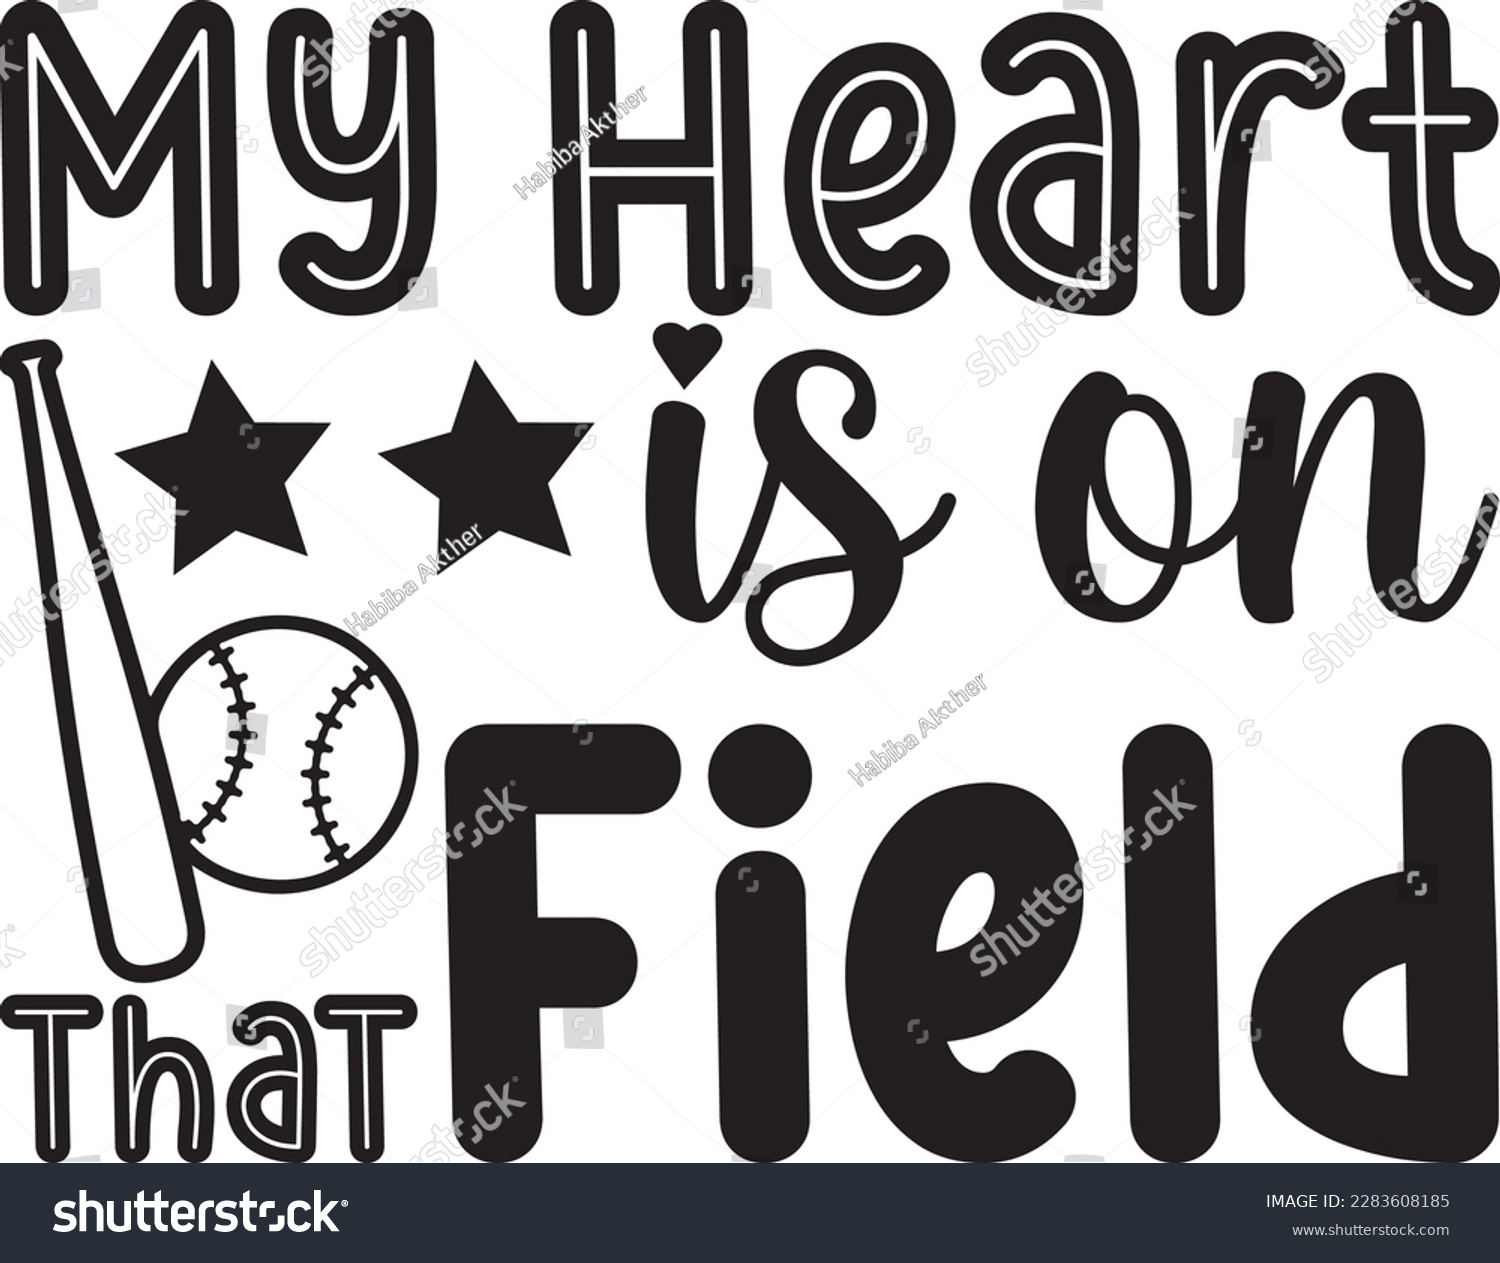 SVG of Baseball y'all svg ,Sports ,Mom Life ,Supportive Mom ,Silhouette, Team, Baseball Template 0027 svg ,eps, Softball , Game day , T-Shirt,  Baseball Stitches ,Vector ,Baseball Threads,cutter,Mascot svg, svg